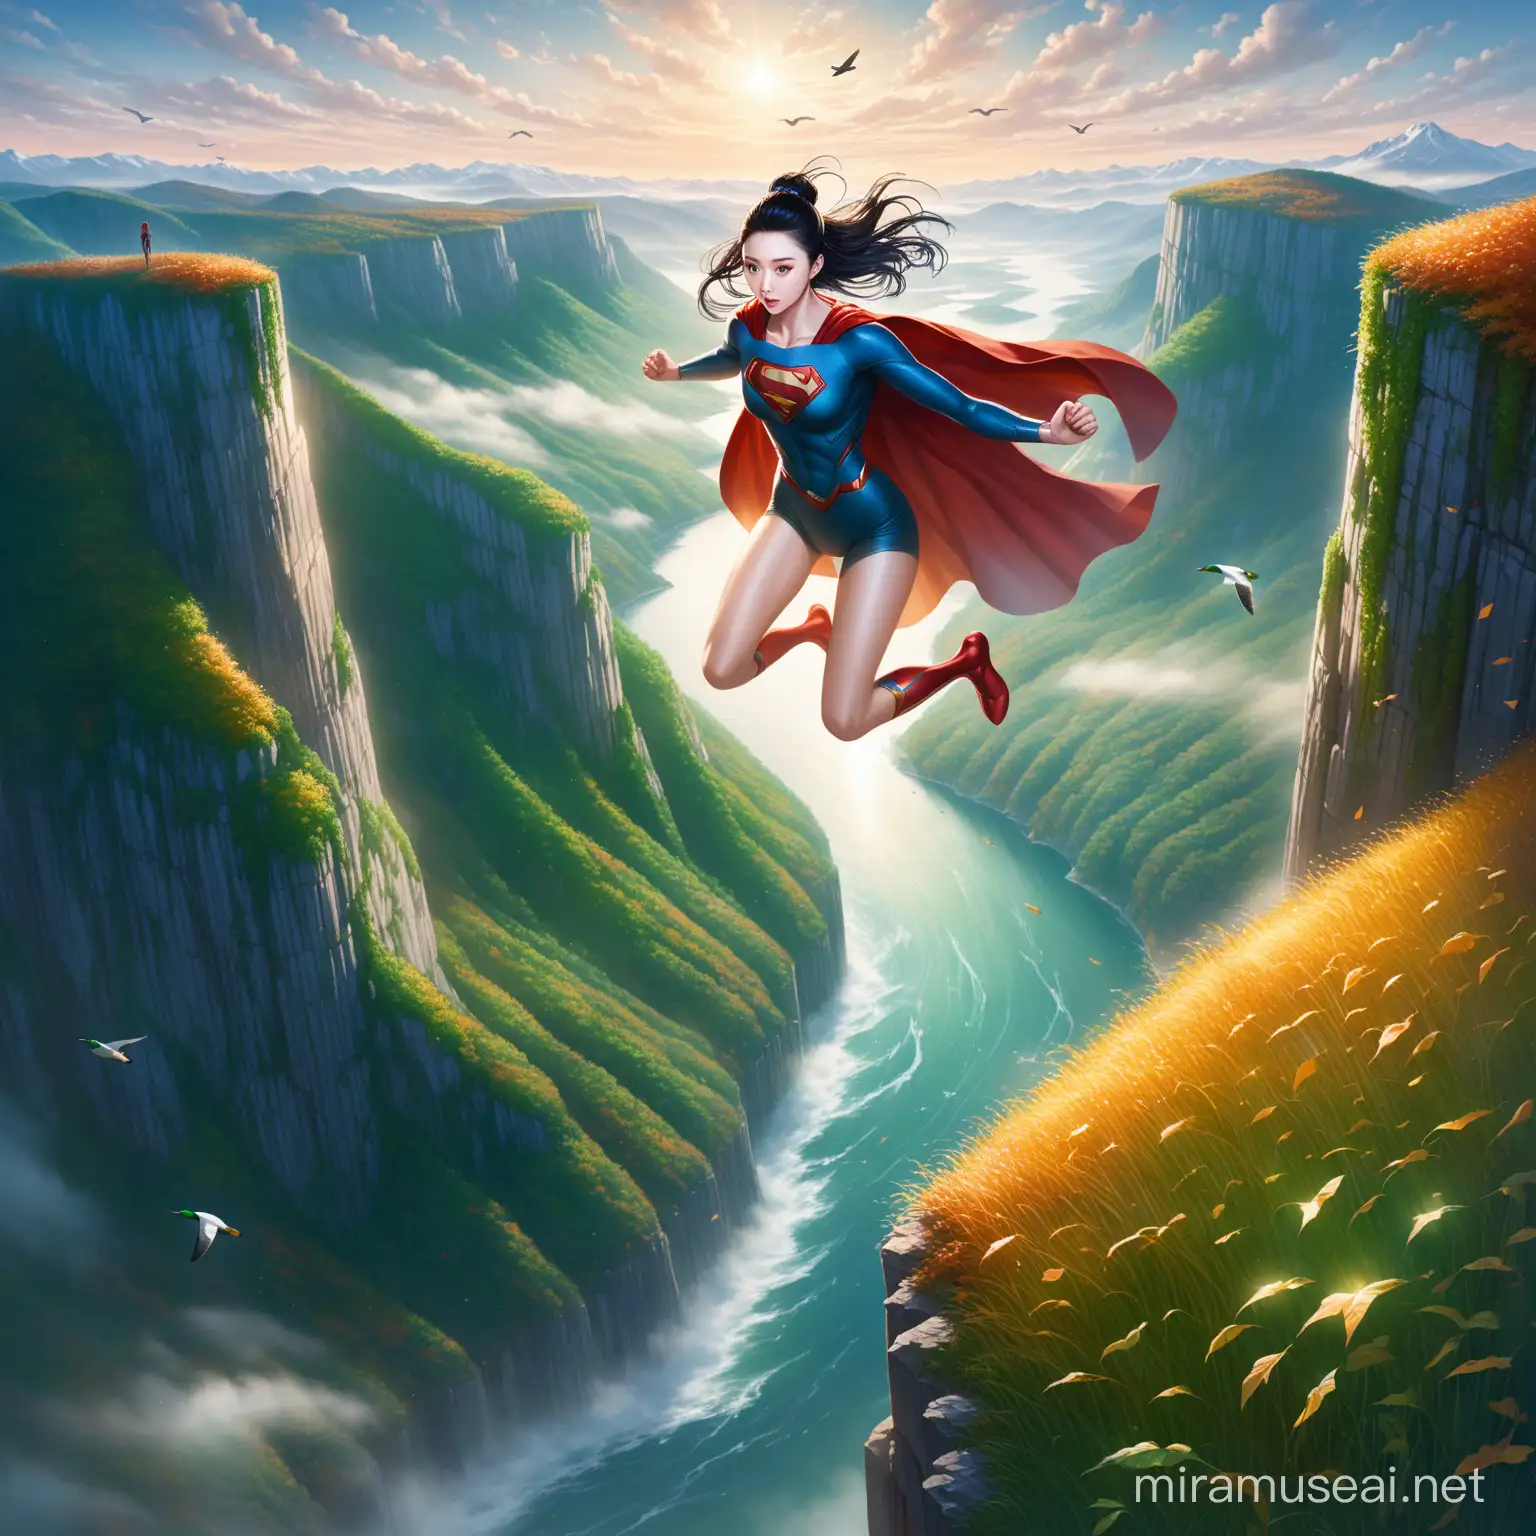 Super Woman Levitating Over Cliff in Metal Superman Outfit